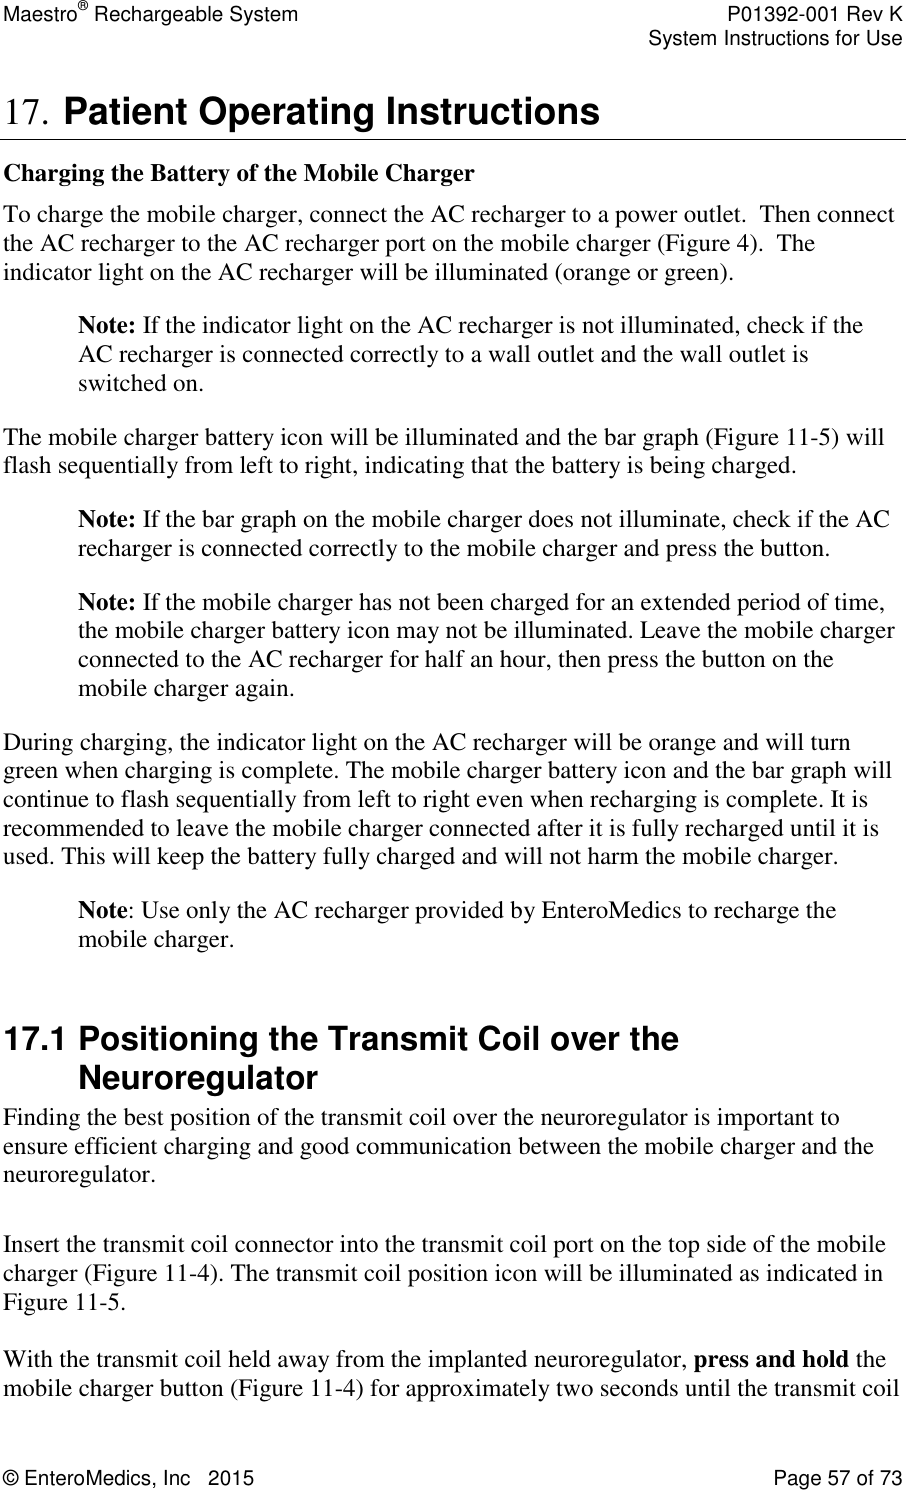 Maestro® Rechargeable System    P01392-001 Rev K     System Instructions for Use  © EnteroMedics, Inc   2015  Page 57 of 73  17. Patient Operating Instructions Charging the Battery of the Mobile Charger To charge the mobile charger, connect the AC recharger to a power outlet.  Then connect the AC recharger to the AC recharger port on the mobile charger (Figure 4).  The indicator light on the AC recharger will be illuminated (orange or green).  Note: If the indicator light on the AC recharger is not illuminated, check if the AC recharger is connected correctly to a wall outlet and the wall outlet is switched on. The mobile charger battery icon will be illuminated and the bar graph (Figure 11-5) will flash sequentially from left to right, indicating that the battery is being charged.  Note: If the bar graph on the mobile charger does not illuminate, check if the AC recharger is connected correctly to the mobile charger and press the button. Note: If the mobile charger has not been charged for an extended period of time, the mobile charger battery icon may not be illuminated. Leave the mobile charger connected to the AC recharger for half an hour, then press the button on the mobile charger again. During charging, the indicator light on the AC recharger will be orange and will turn green when charging is complete. The mobile charger battery icon and the bar graph will continue to flash sequentially from left to right even when recharging is complete. It is recommended to leave the mobile charger connected after it is fully recharged until it is used. This will keep the battery fully charged and will not harm the mobile charger. Note: Use only the AC recharger provided by EnteroMedics to recharge the mobile charger.   17.1 Positioning the Transmit Coil over the Neuroregulator Finding the best position of the transmit coil over the neuroregulator is important to ensure efficient charging and good communication between the mobile charger and the neuroregulator.   Insert the transmit coil connector into the transmit coil port on the top side of the mobile charger (Figure 11-4). The transmit coil position icon will be illuminated as indicated in Figure 11-5.  With the transmit coil held away from the implanted neuroregulator, press and hold the mobile charger button (Figure 11-4) for approximately two seconds until the transmit coil 